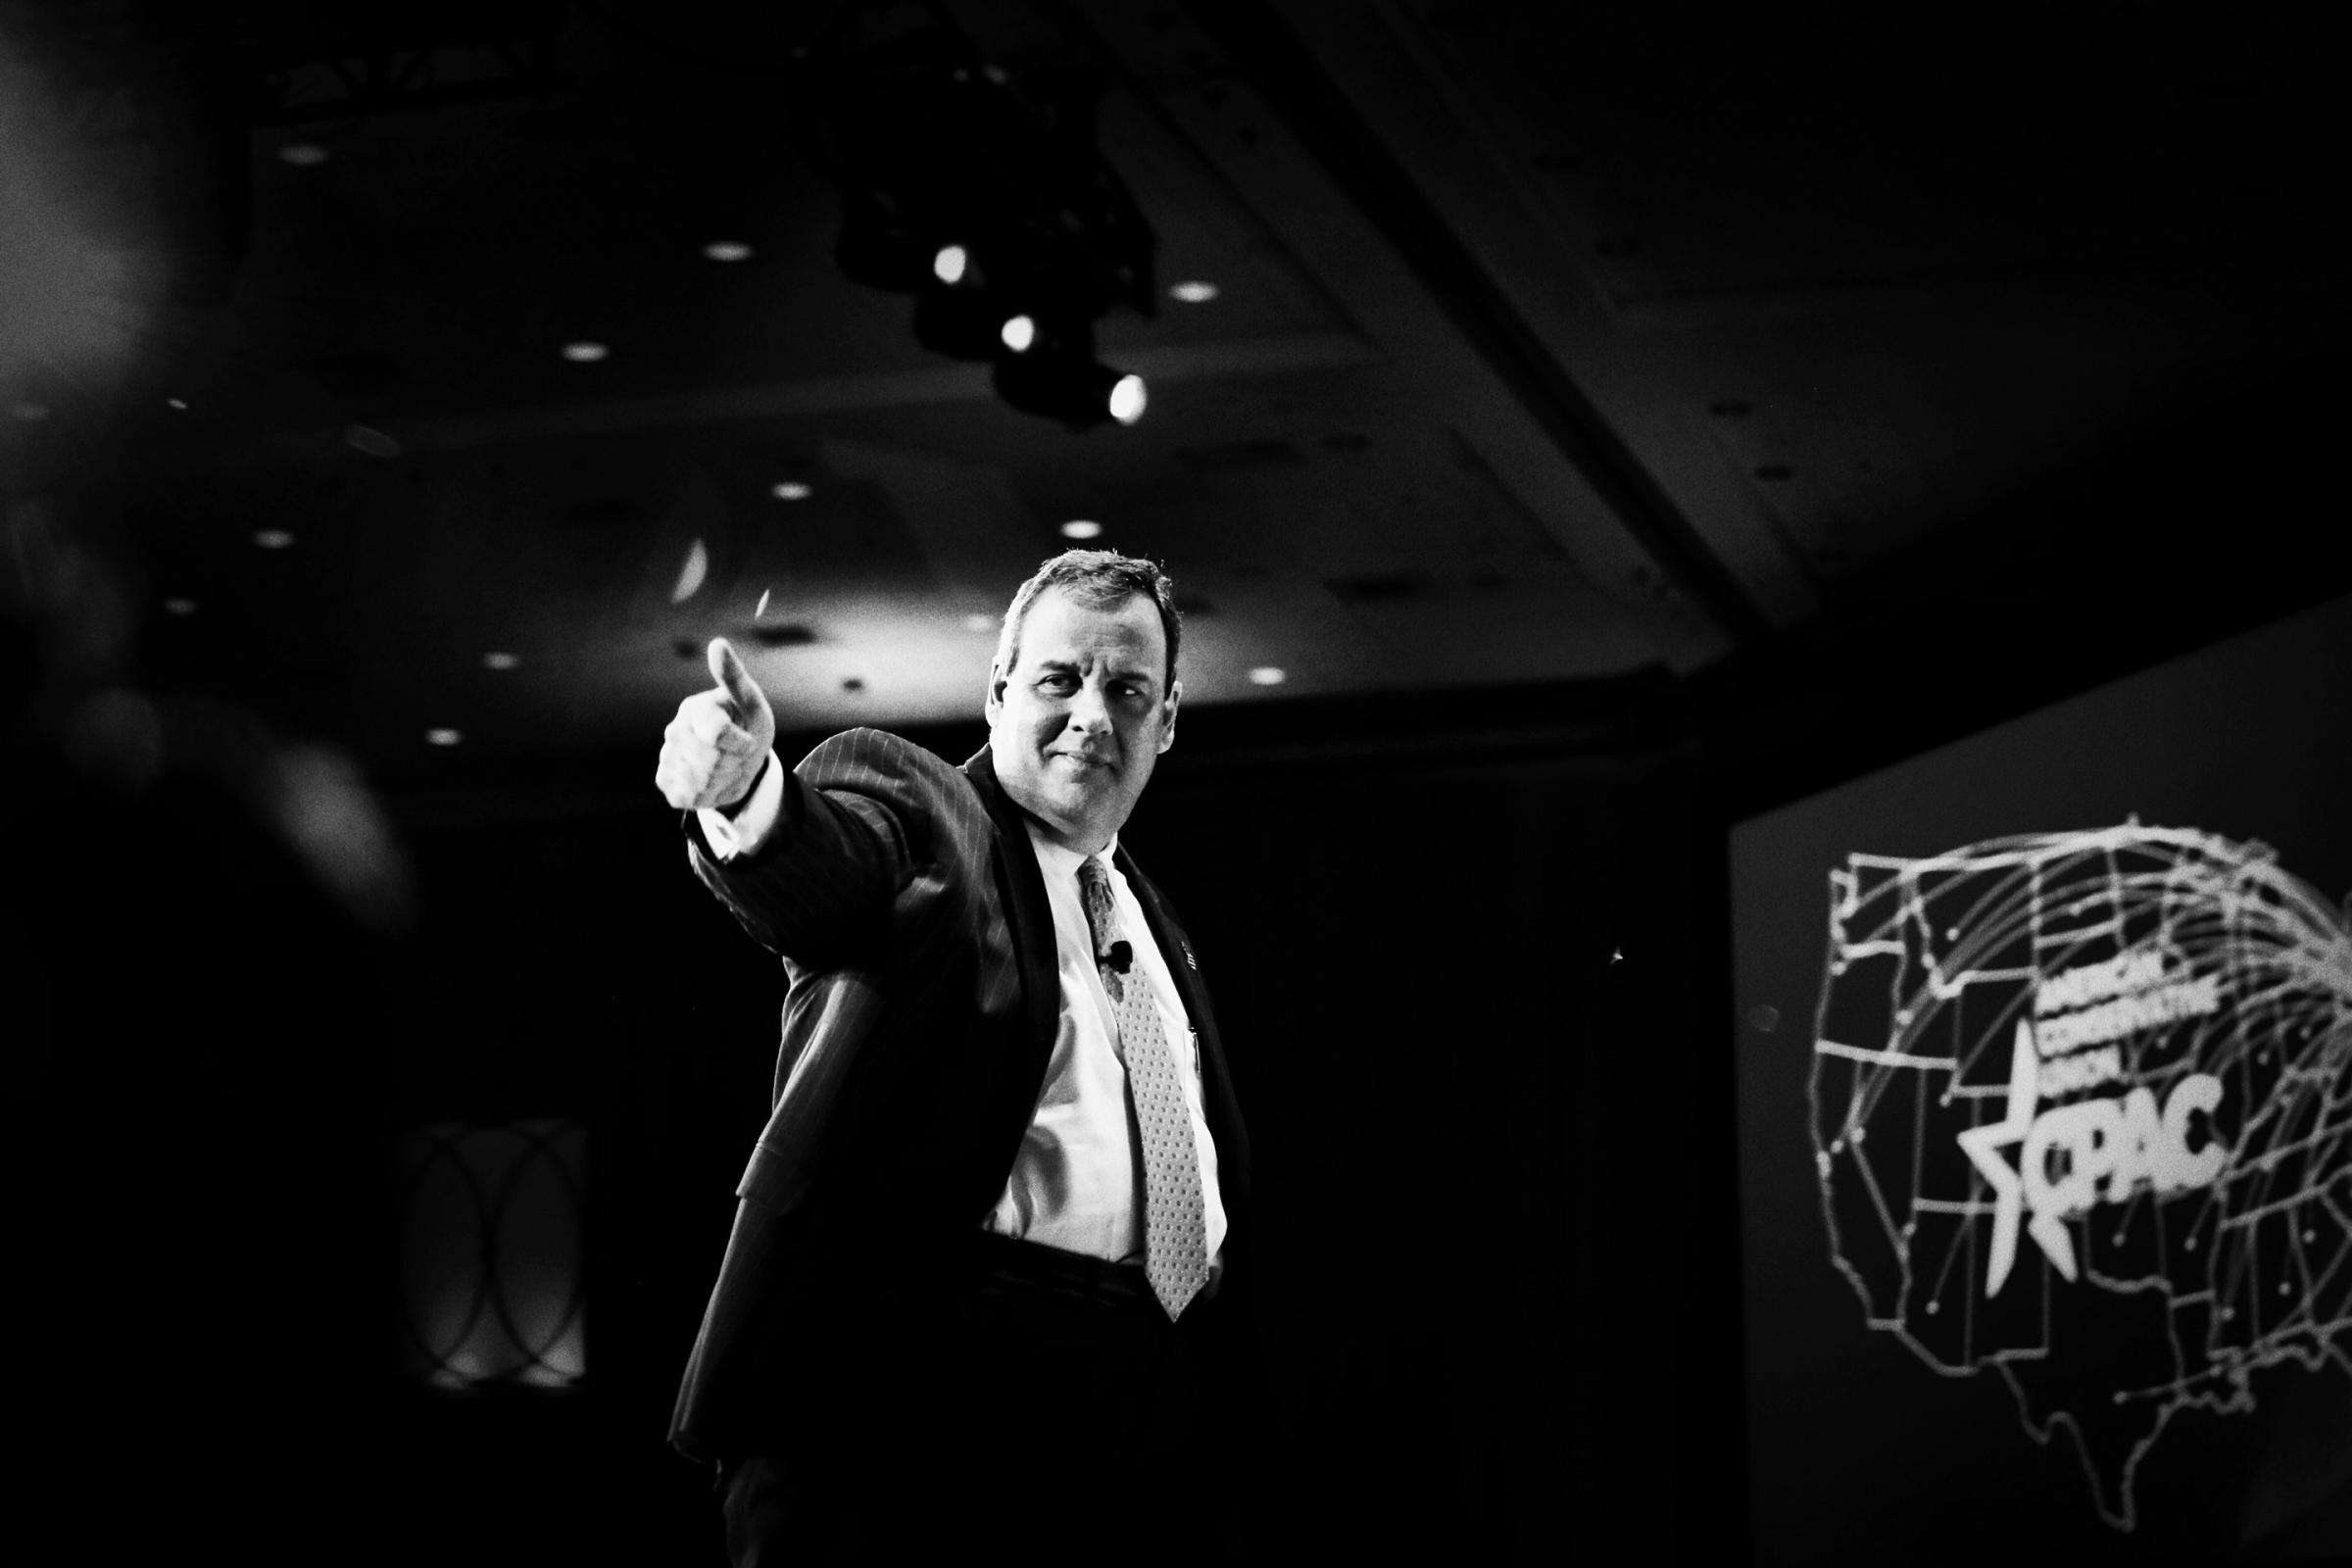 New Jersey Gov. Chris Christie gives a thumb's up at CPAC in National Harbor, Md. on Feb. 26, 2015.